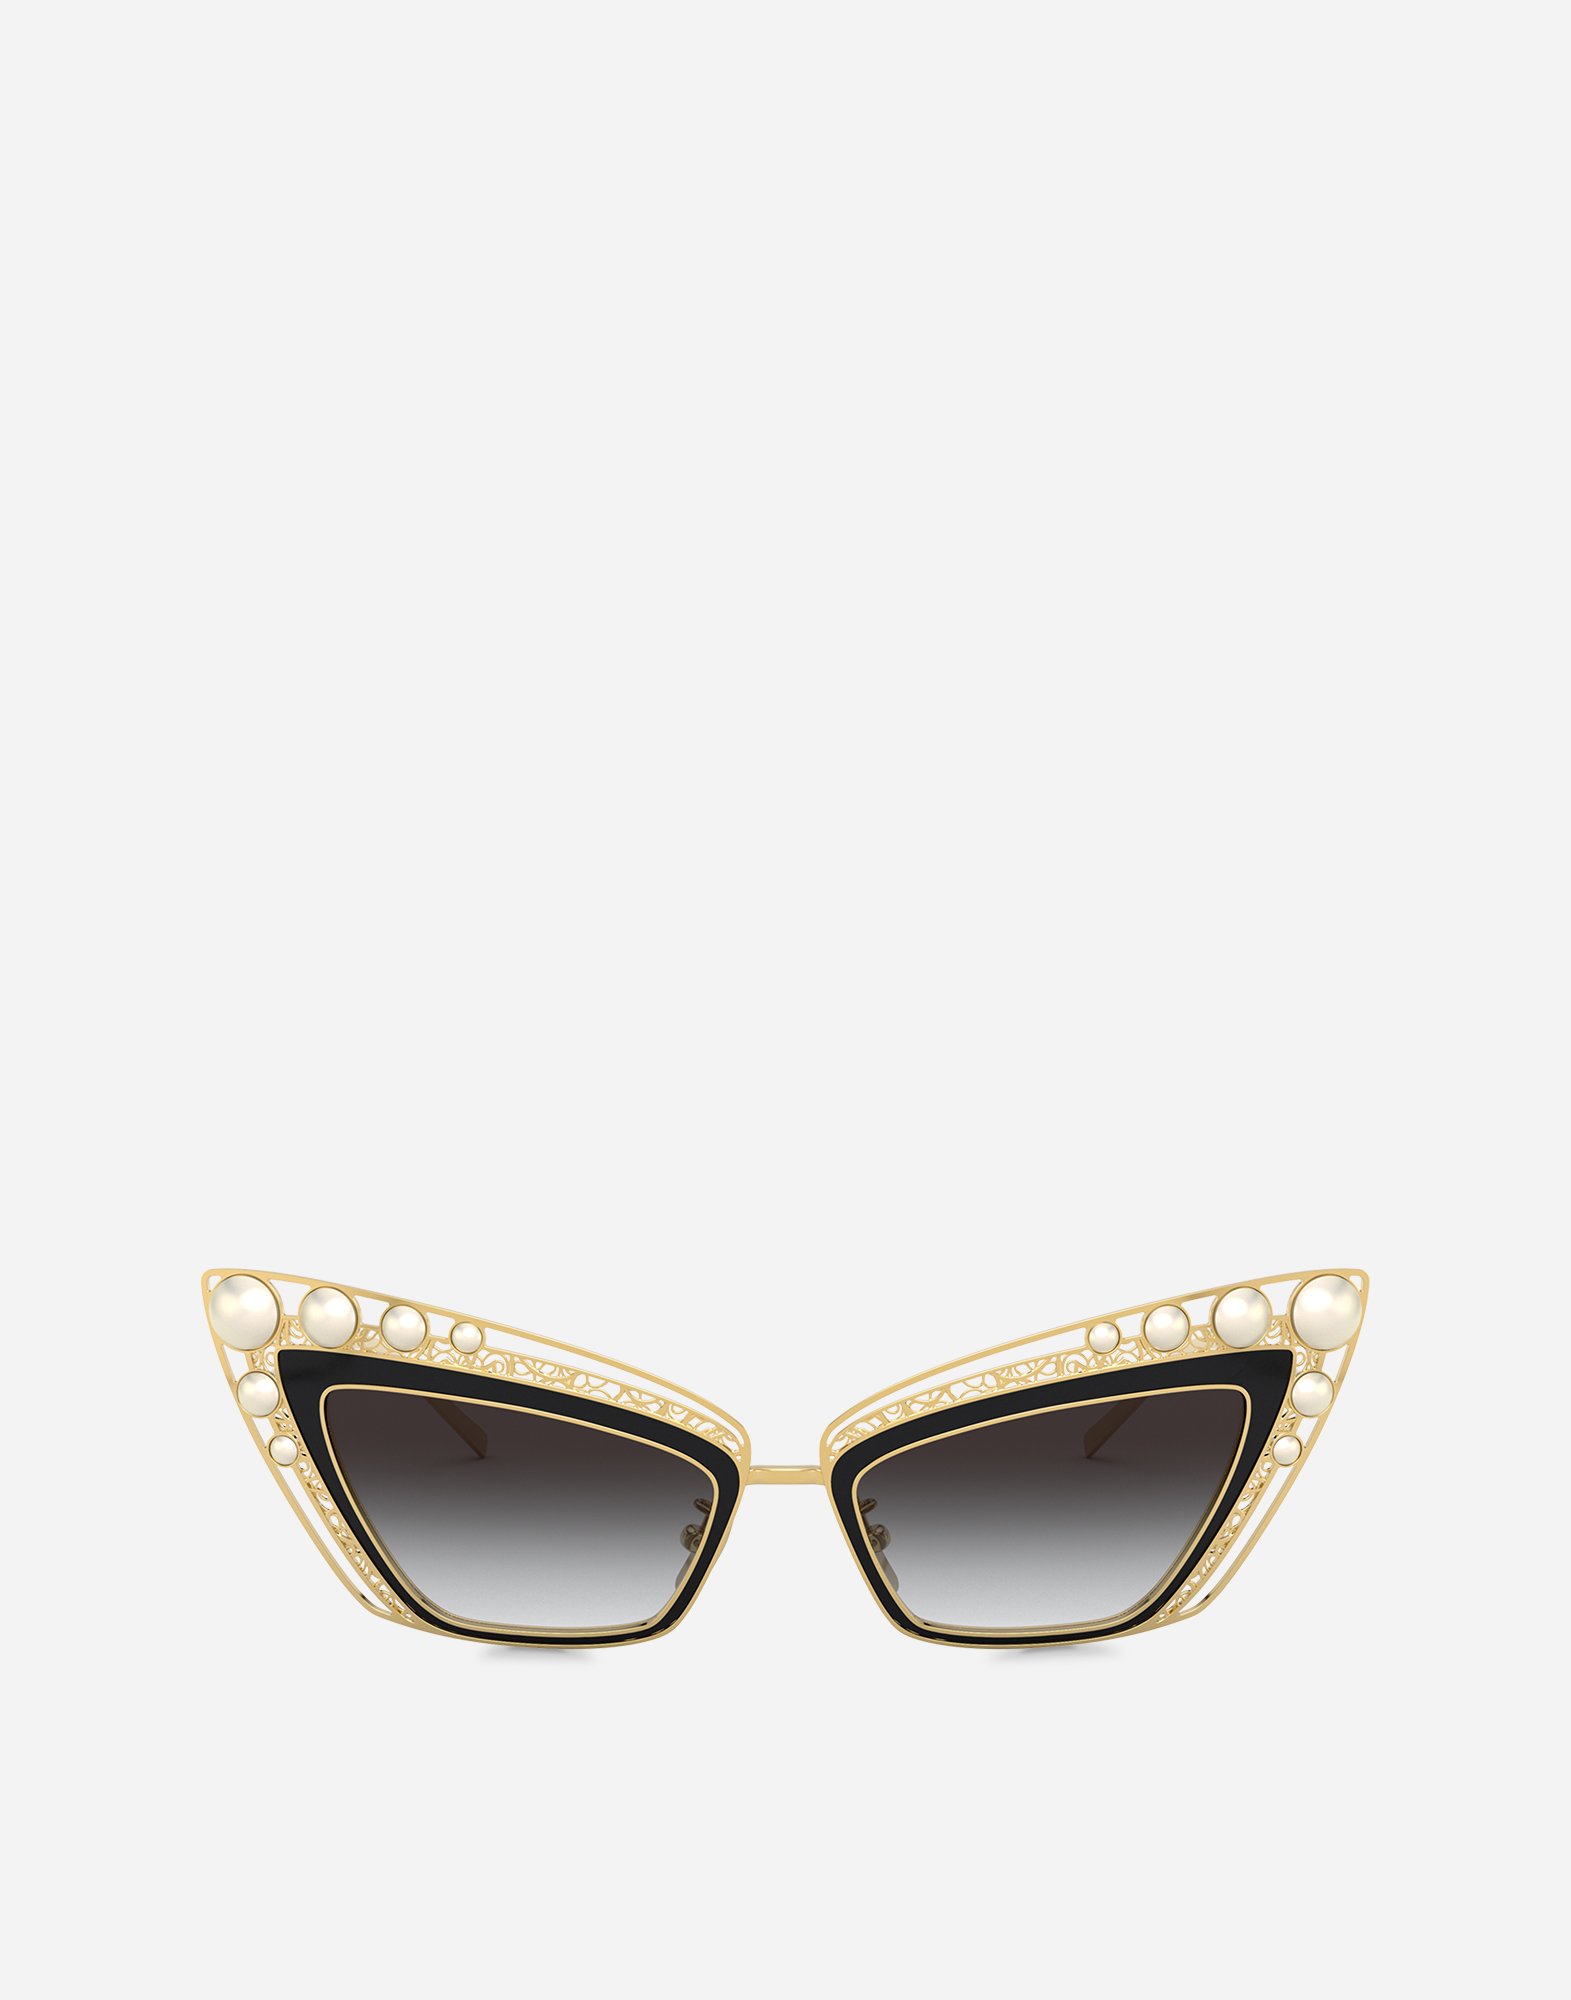 Christmas sunglasses in Gold